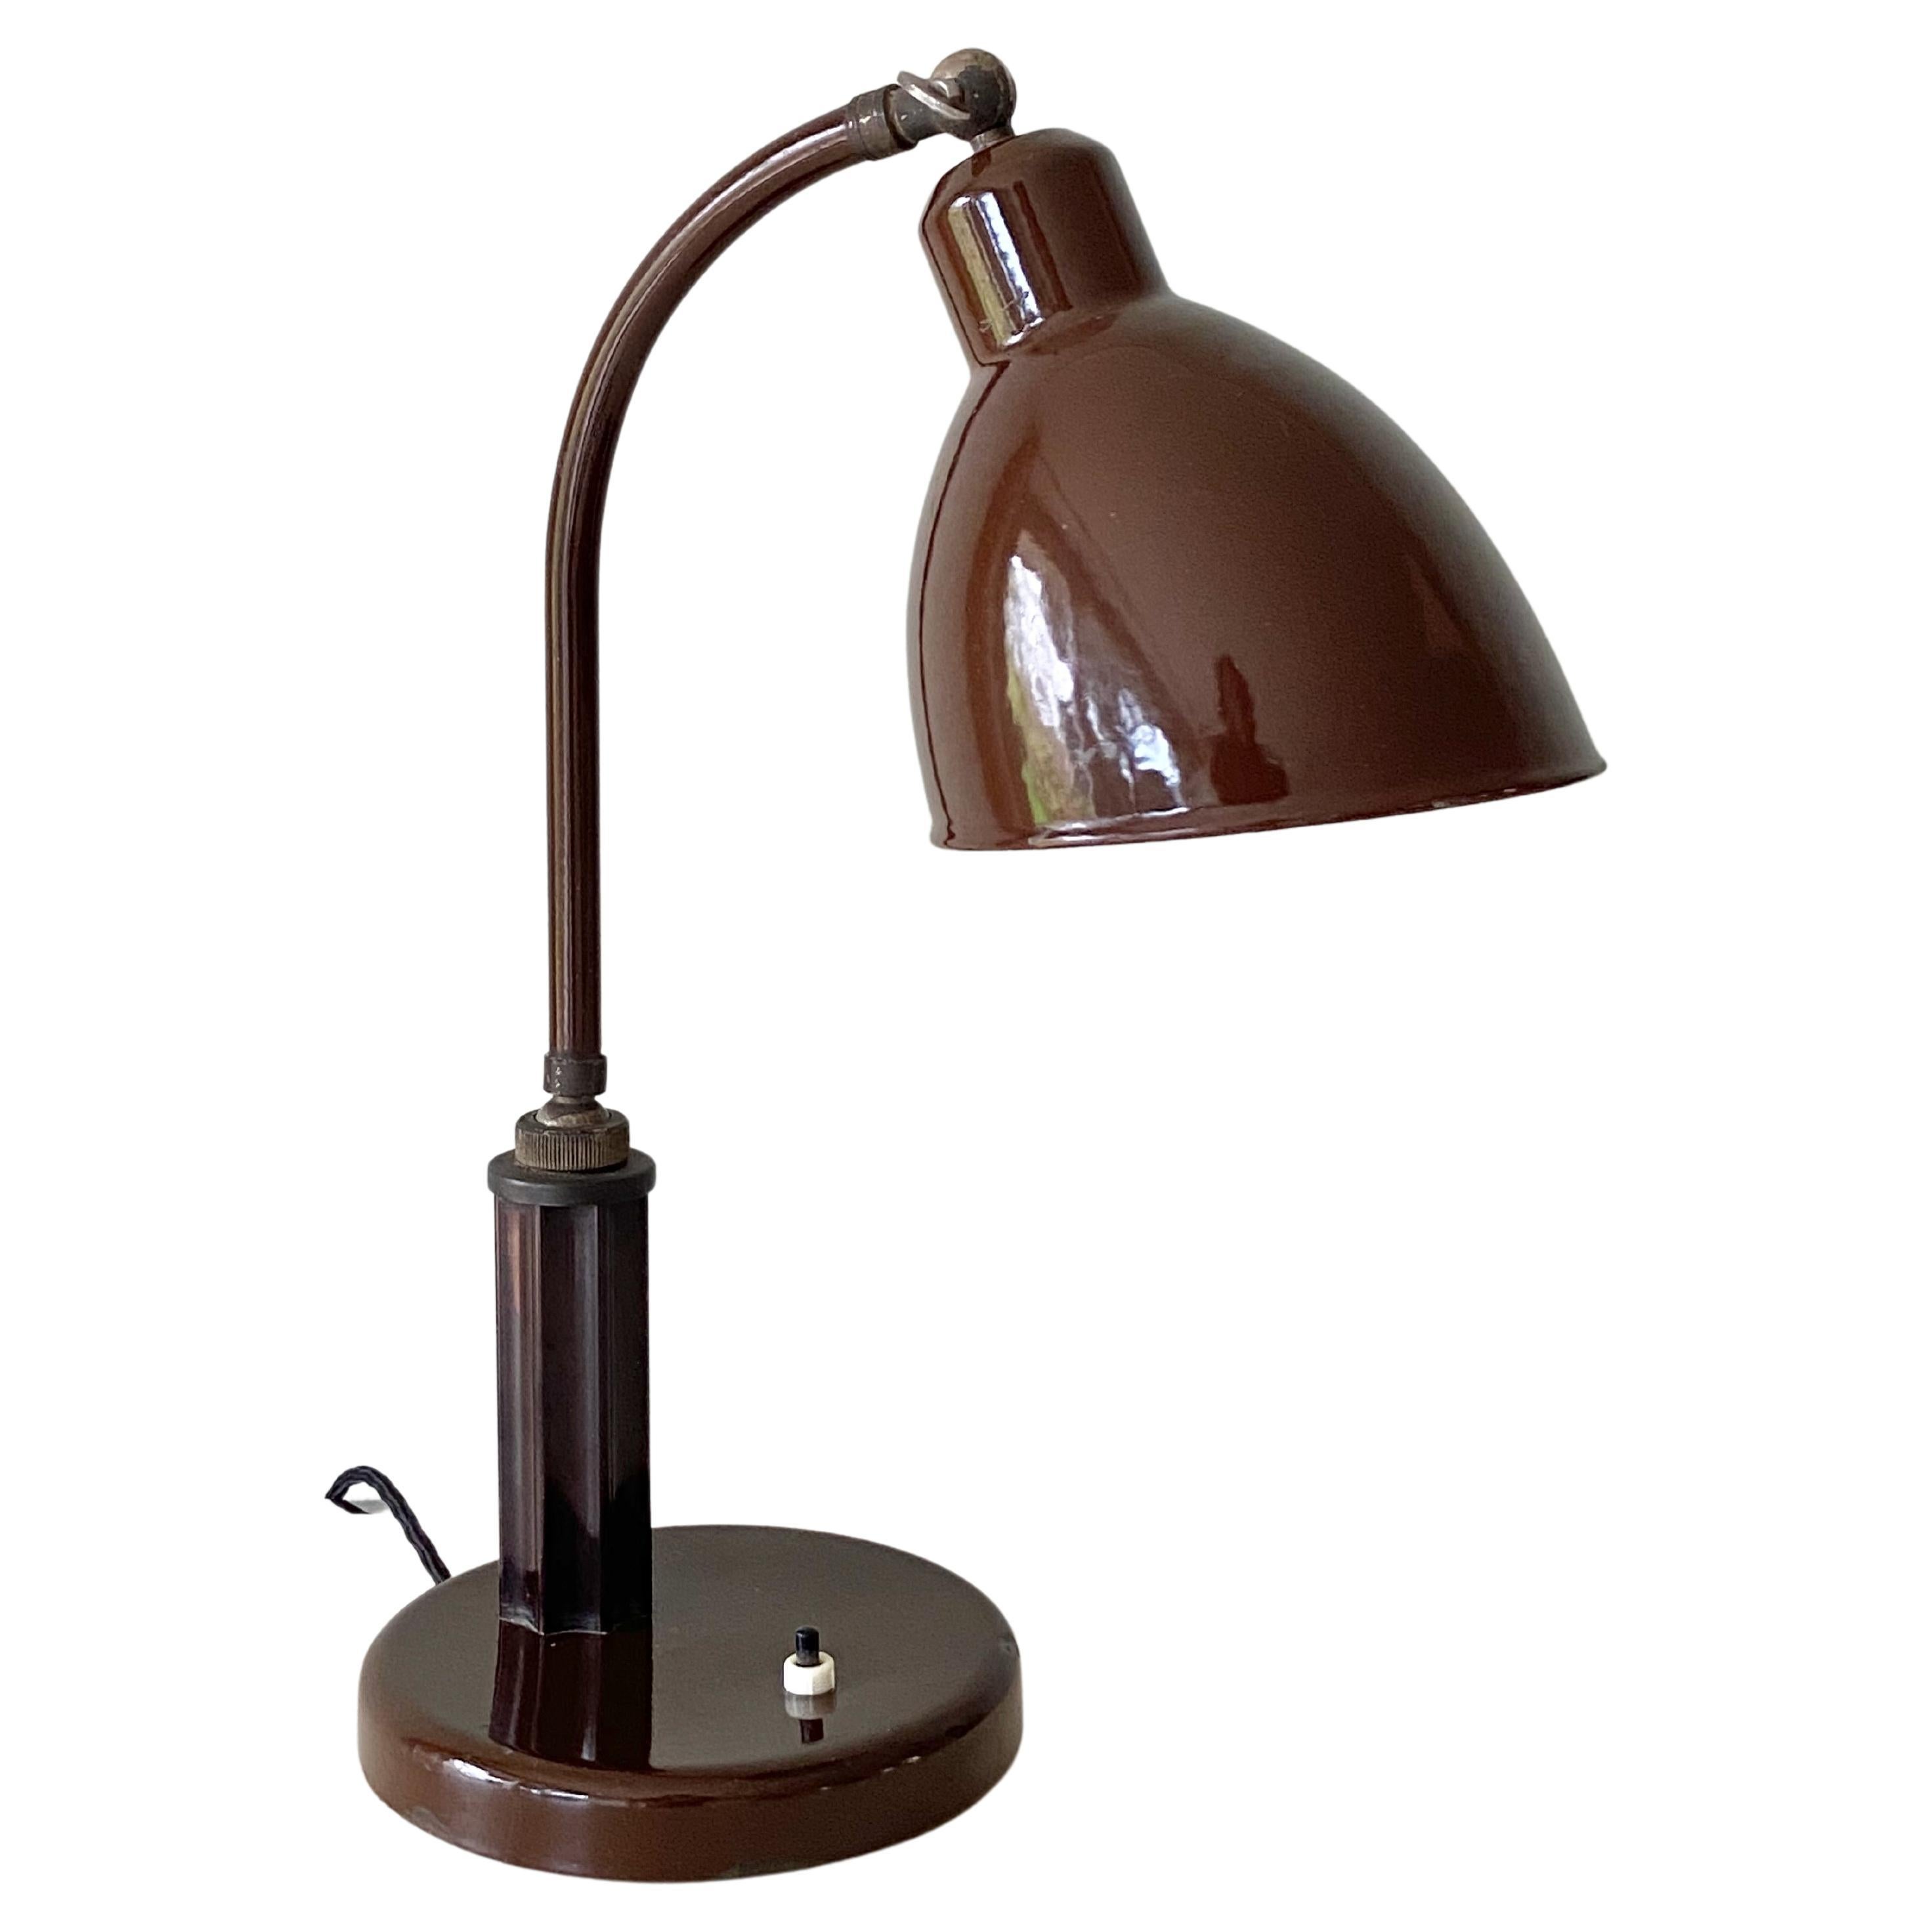 Molitor Grapholux Lamp Brown Enamel and Bakelite Stick by Christian Dell 1930s